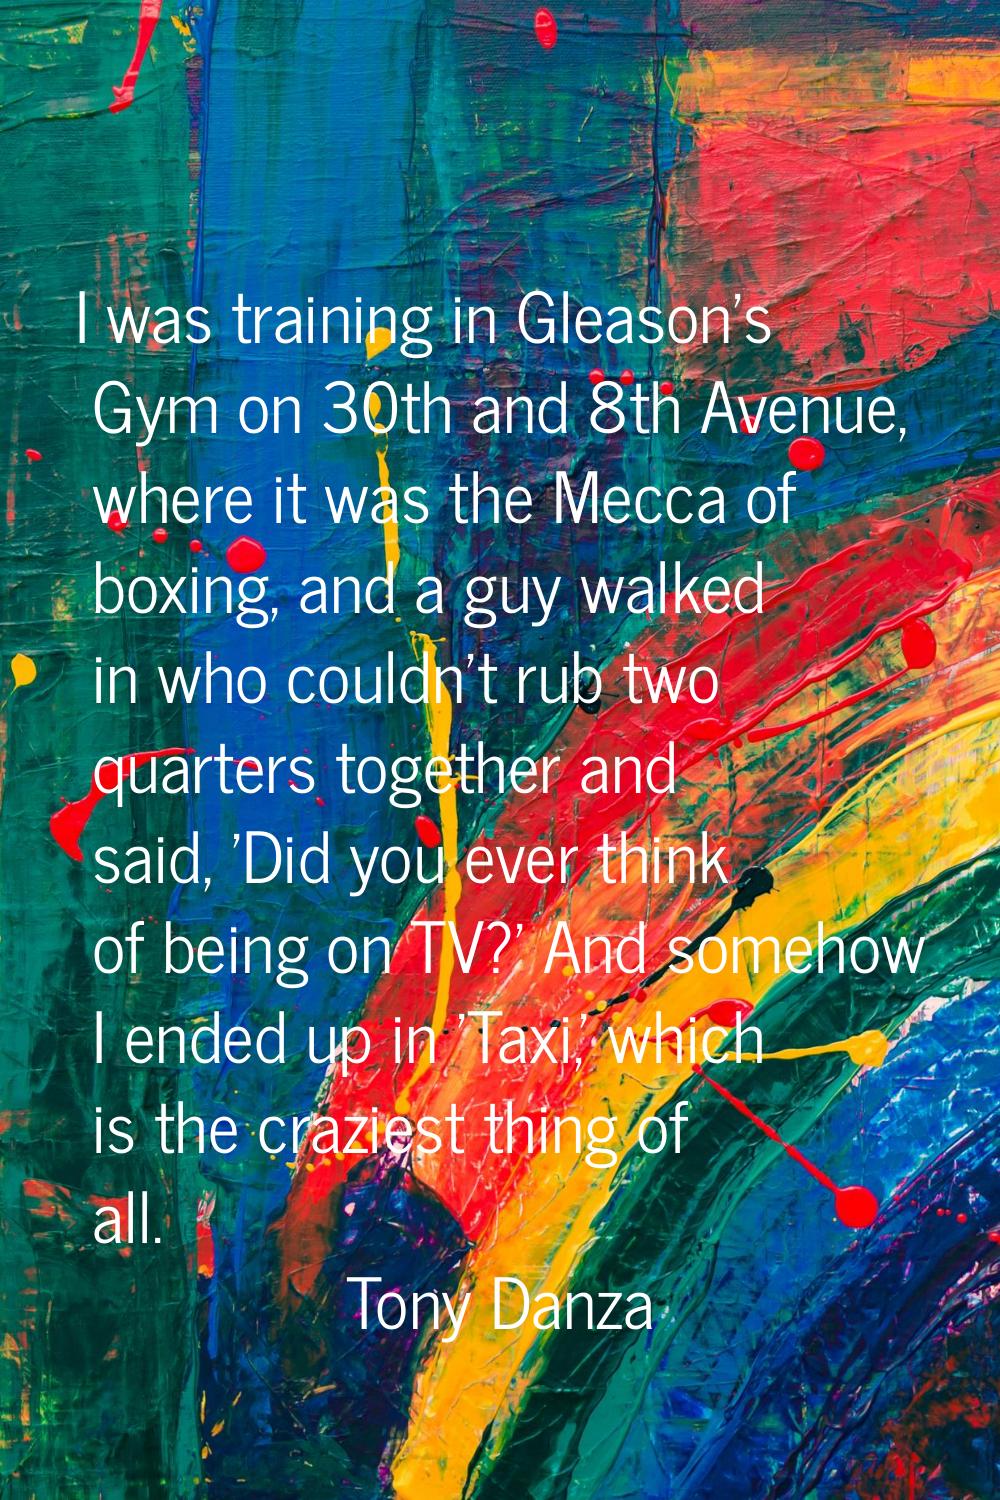 I was training in Gleason's Gym on 30th and 8th Avenue, where it was the Mecca of boxing, and a guy